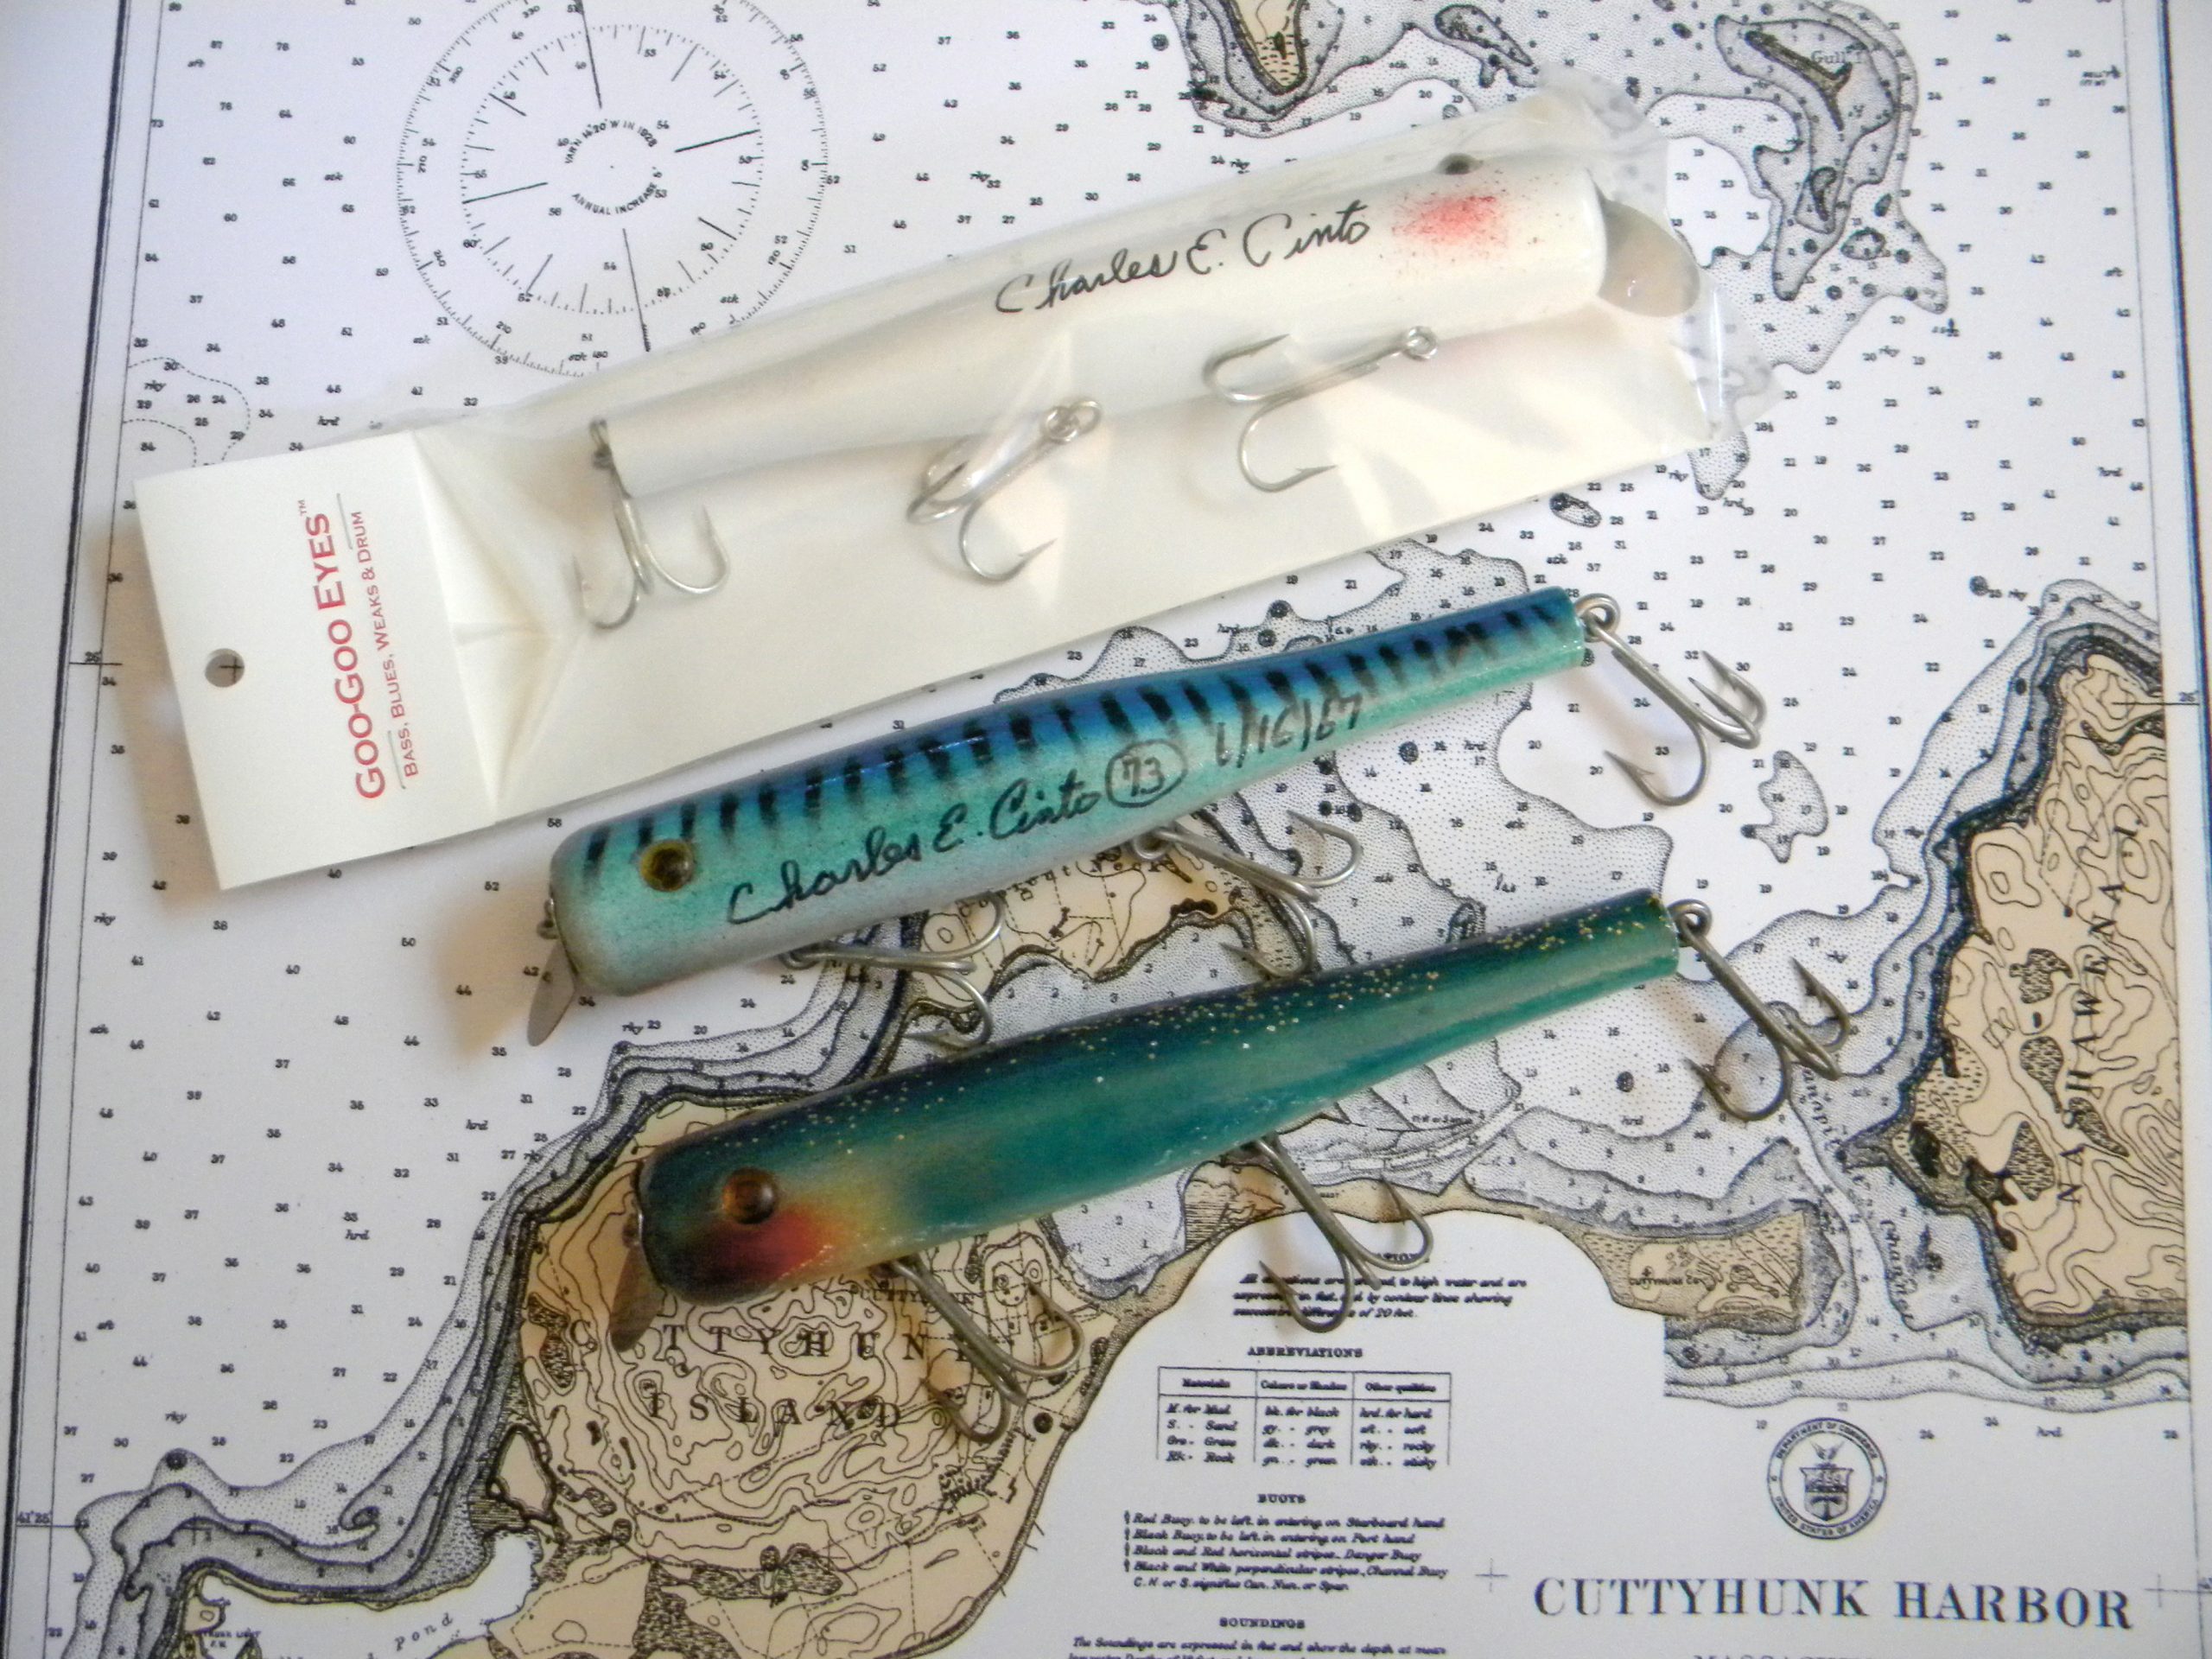 On The Water's Lure of the Month: June 2011